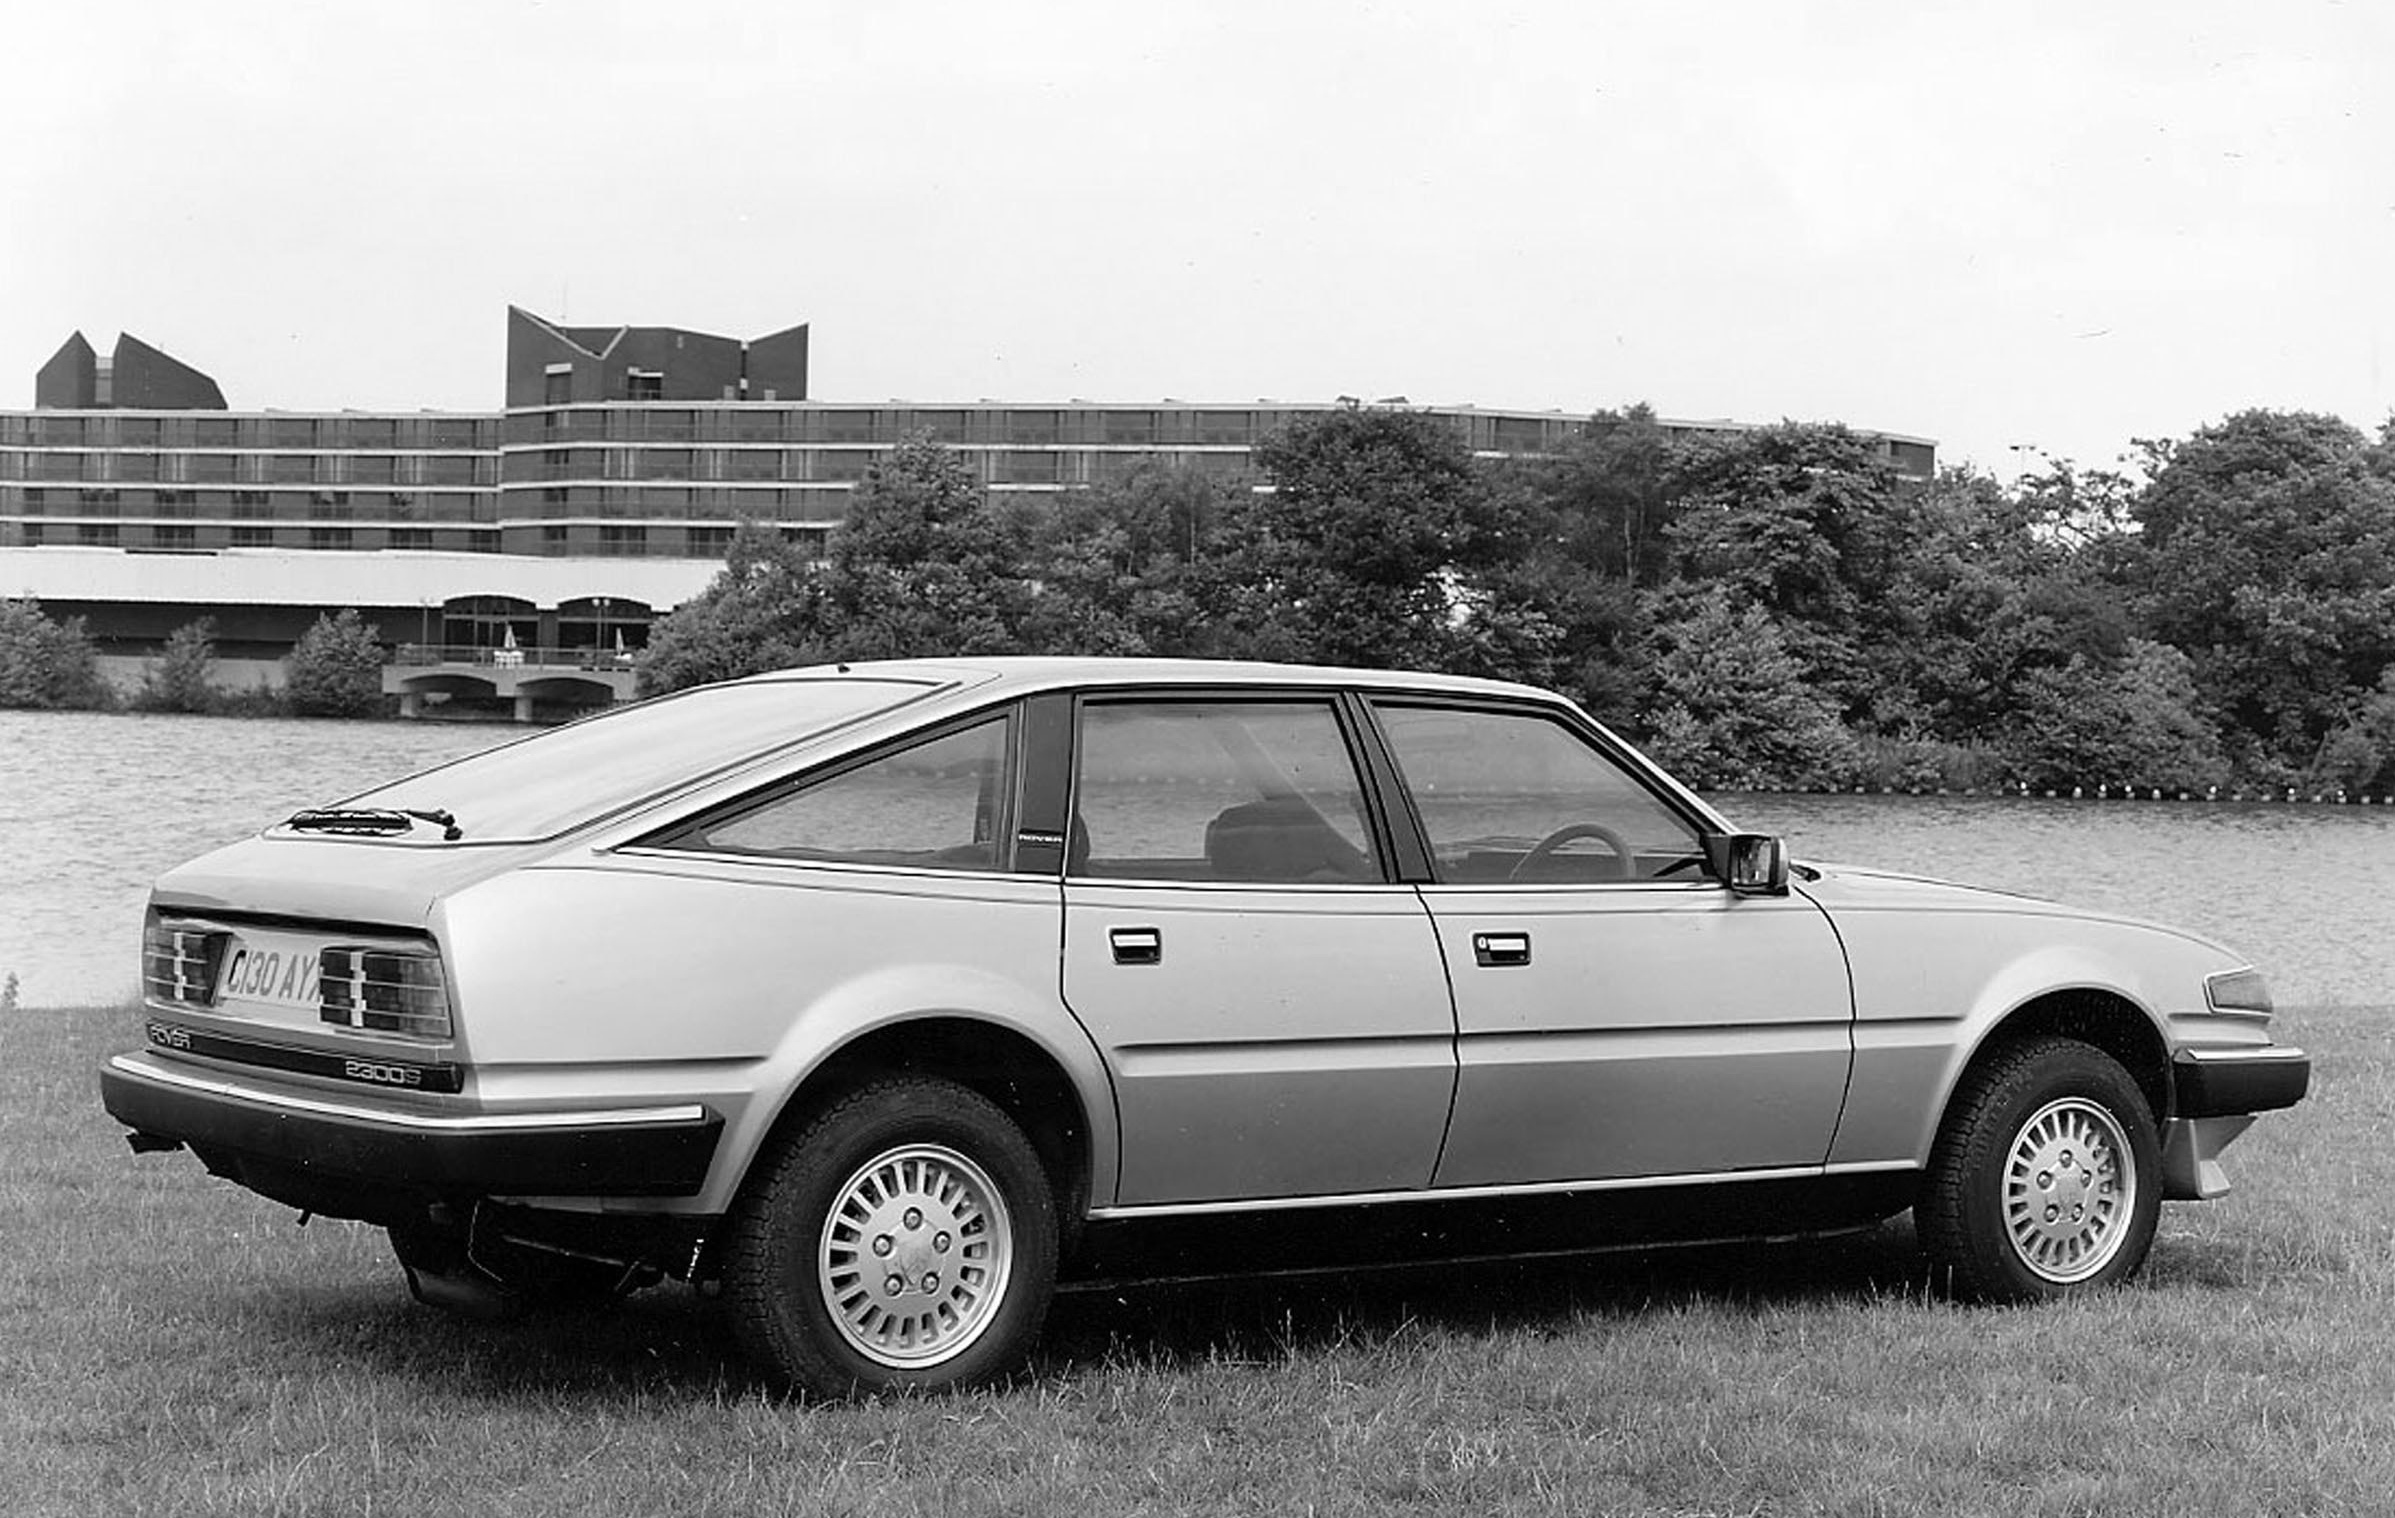 History of the Rover SD1